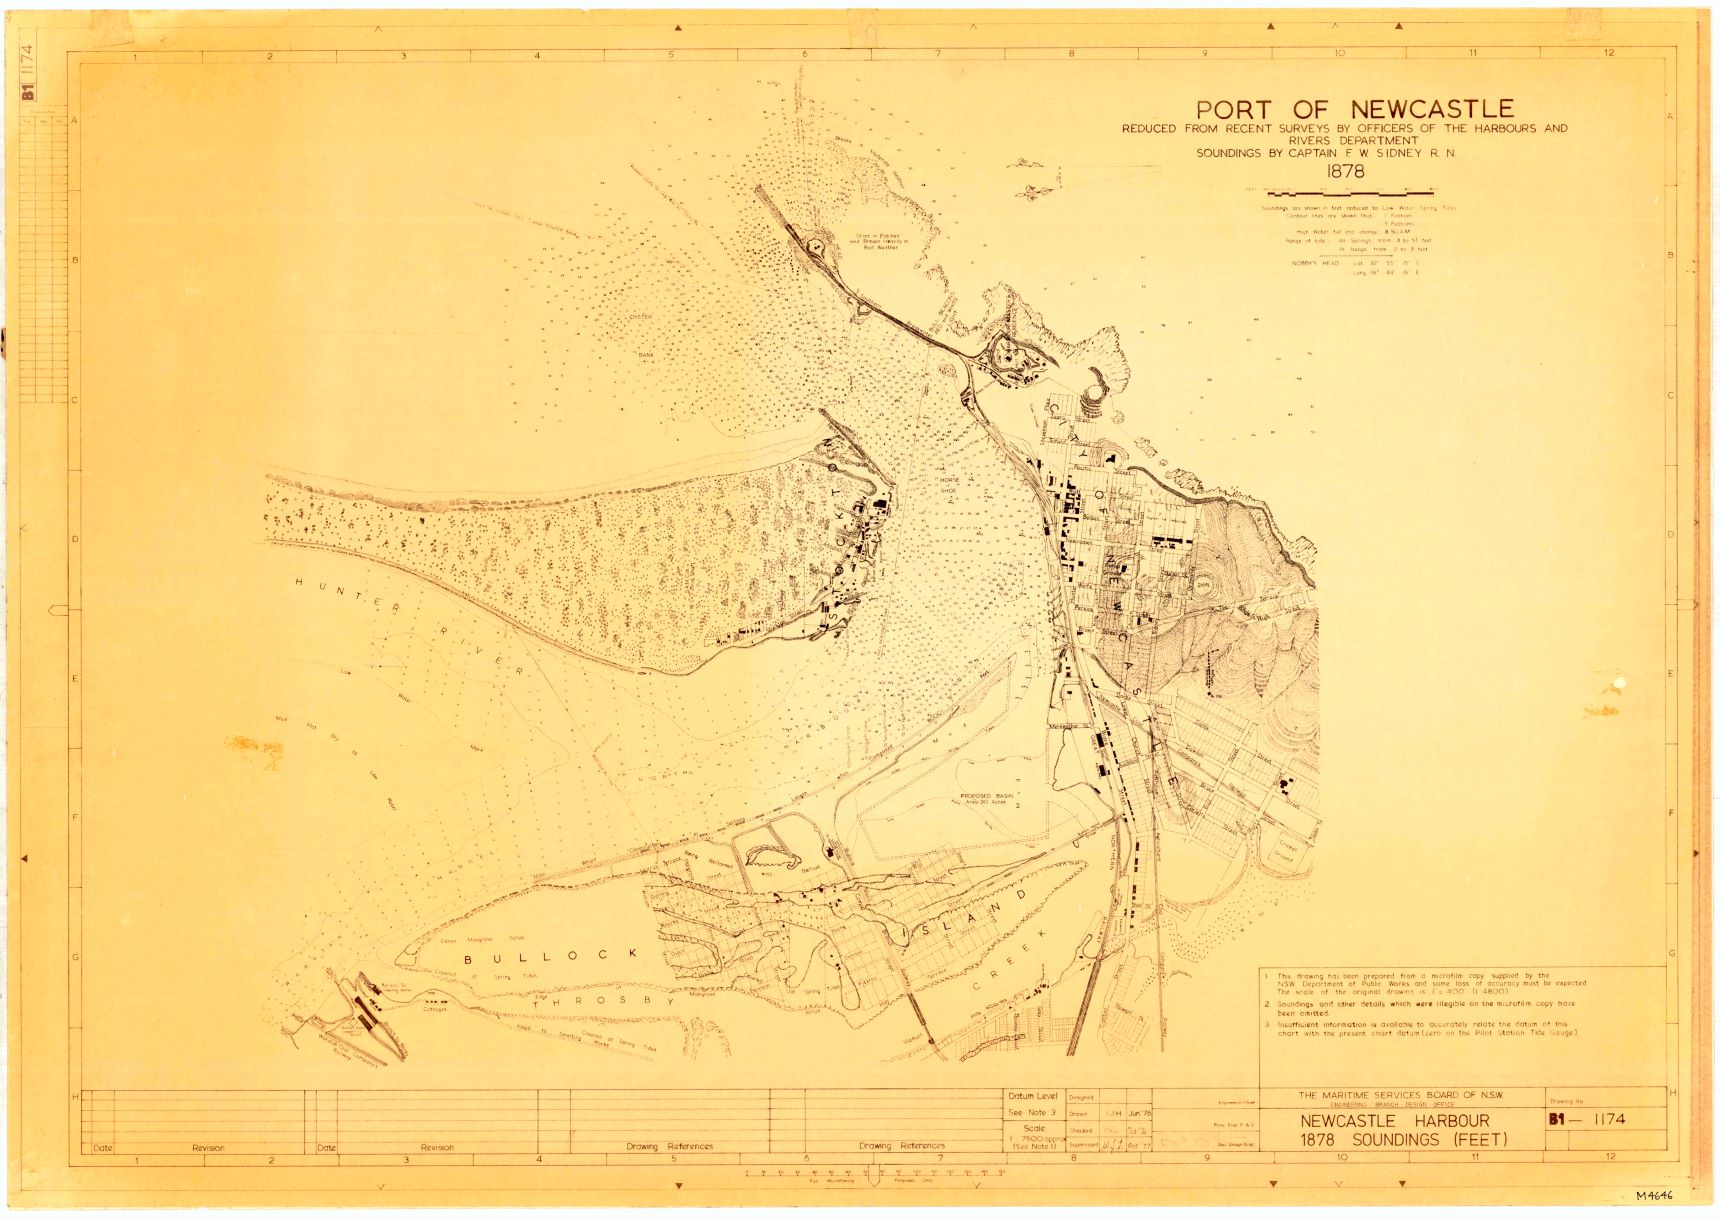 Figure 28: Map of the port of Newcastle, 1878